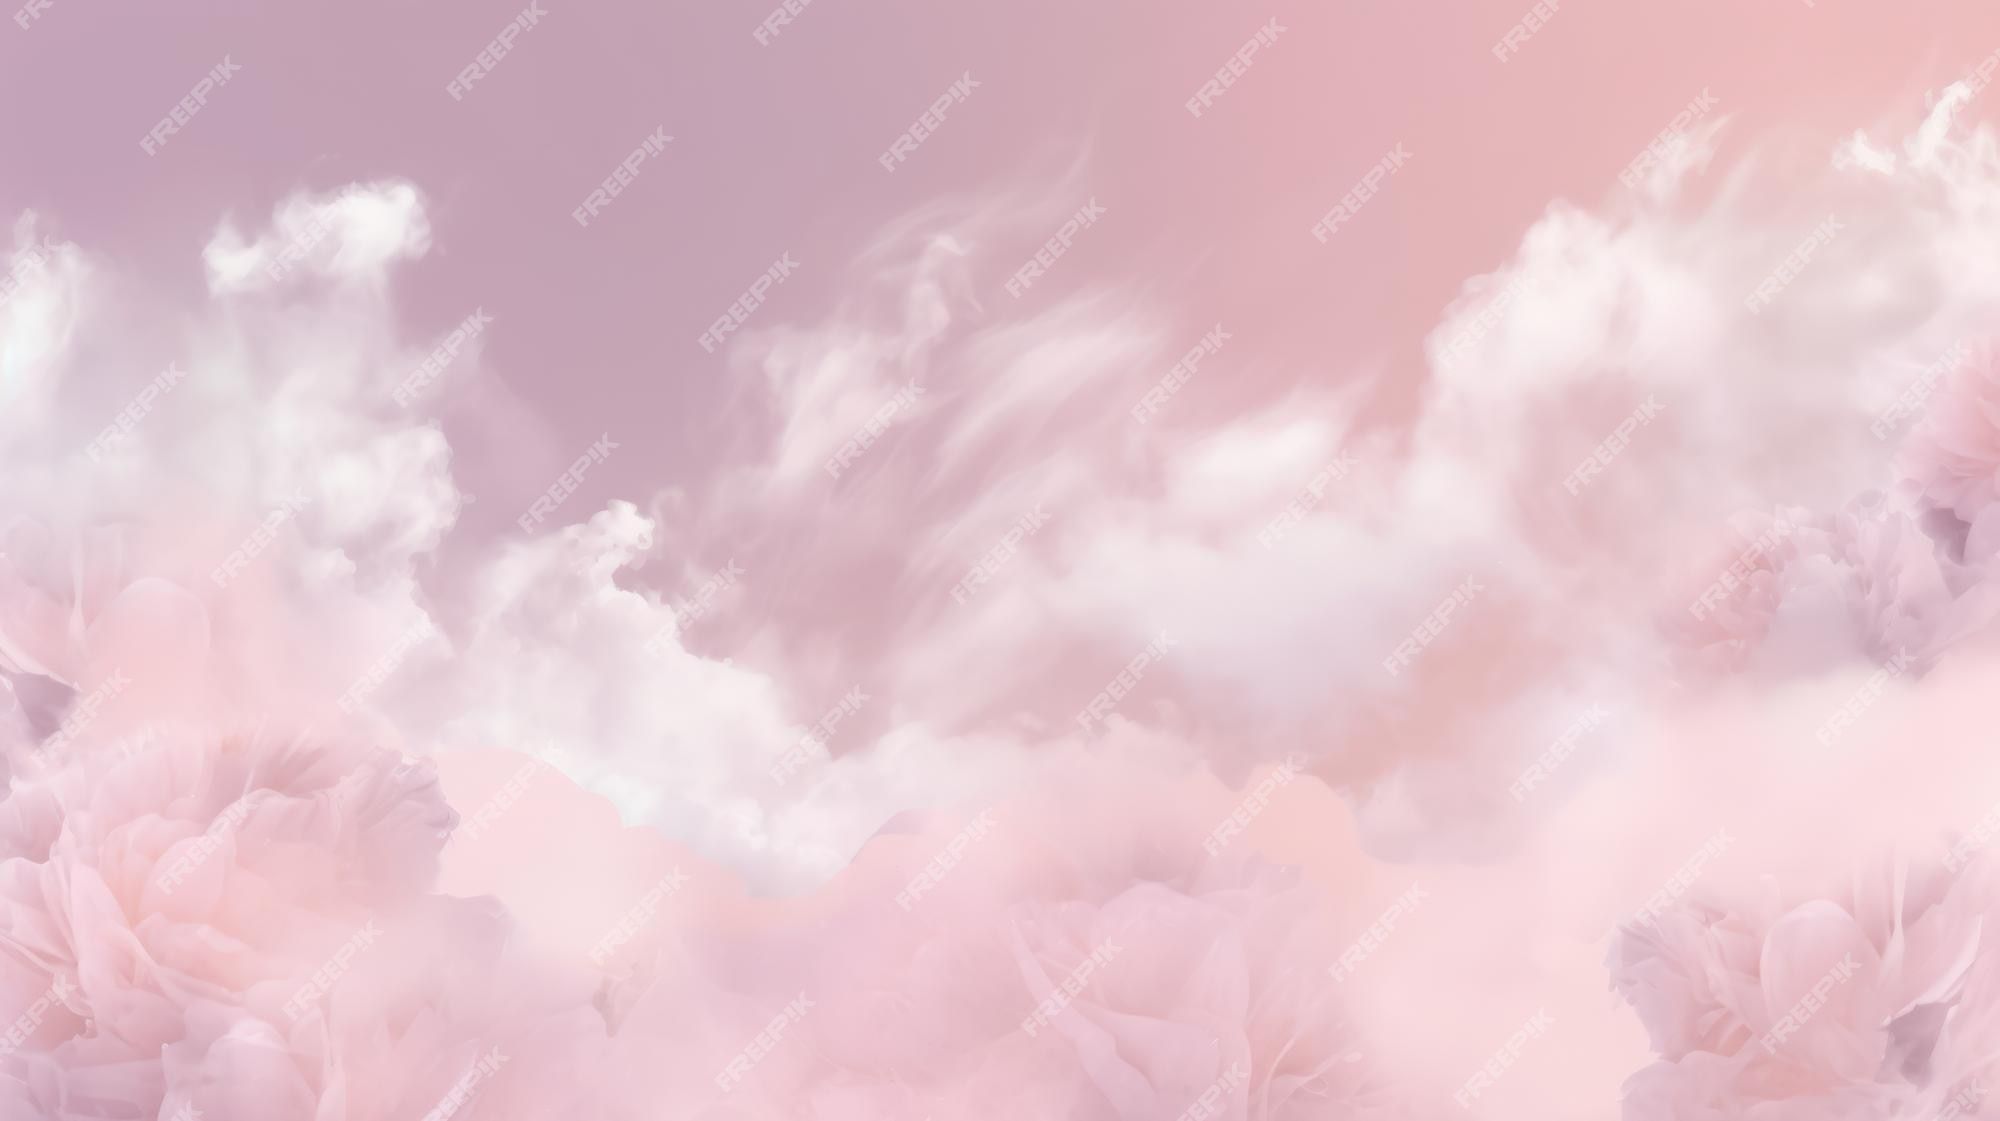 A soft pink and purple sky with clouds and flowers - Soft pink